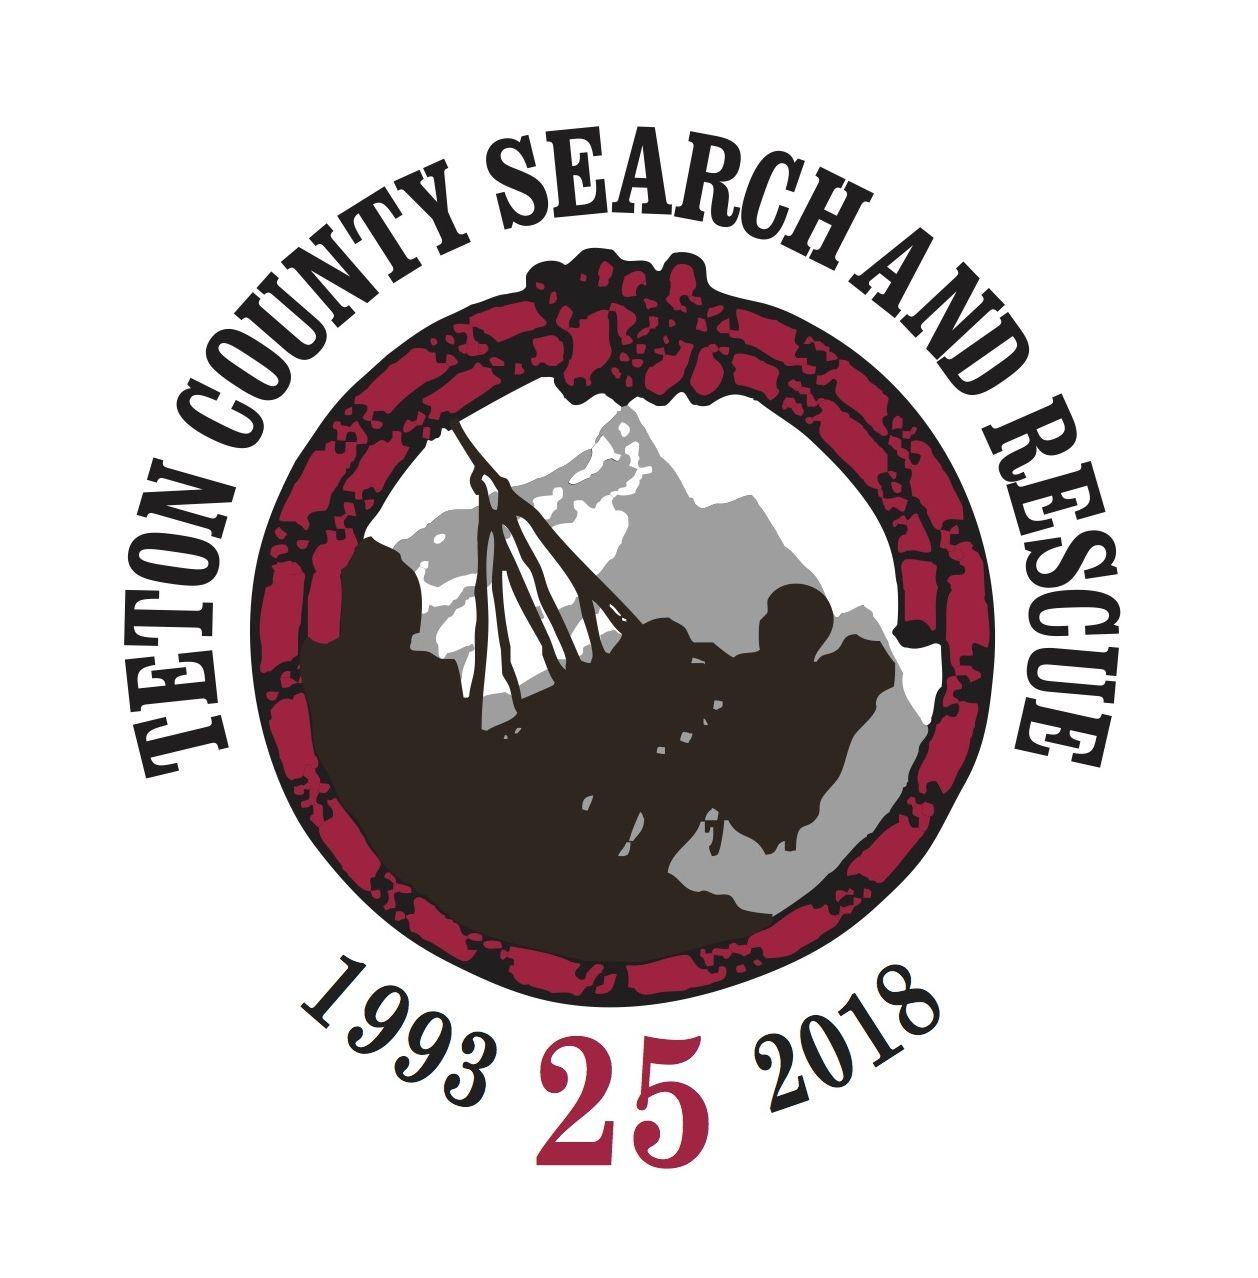 Search and Rescue Medical Cross Logo - Teton County Search and Rescue